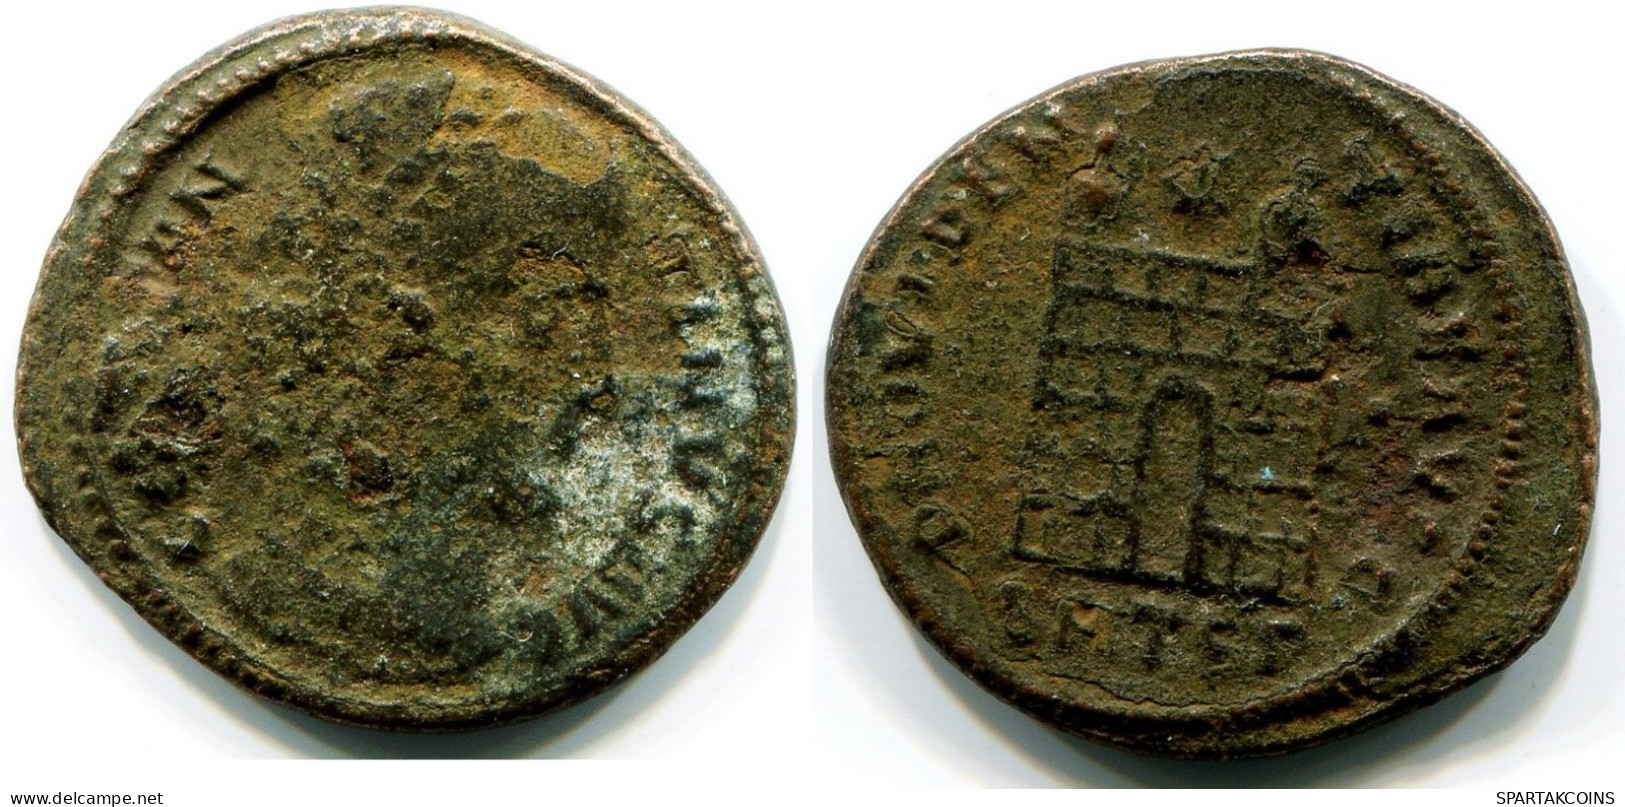 CONSTANTINE I MINTED IN THESSALONICA FOUND IN IHNASYAH HOARD #ANC11136.14.F.A - El Imperio Christiano (307 / 363)